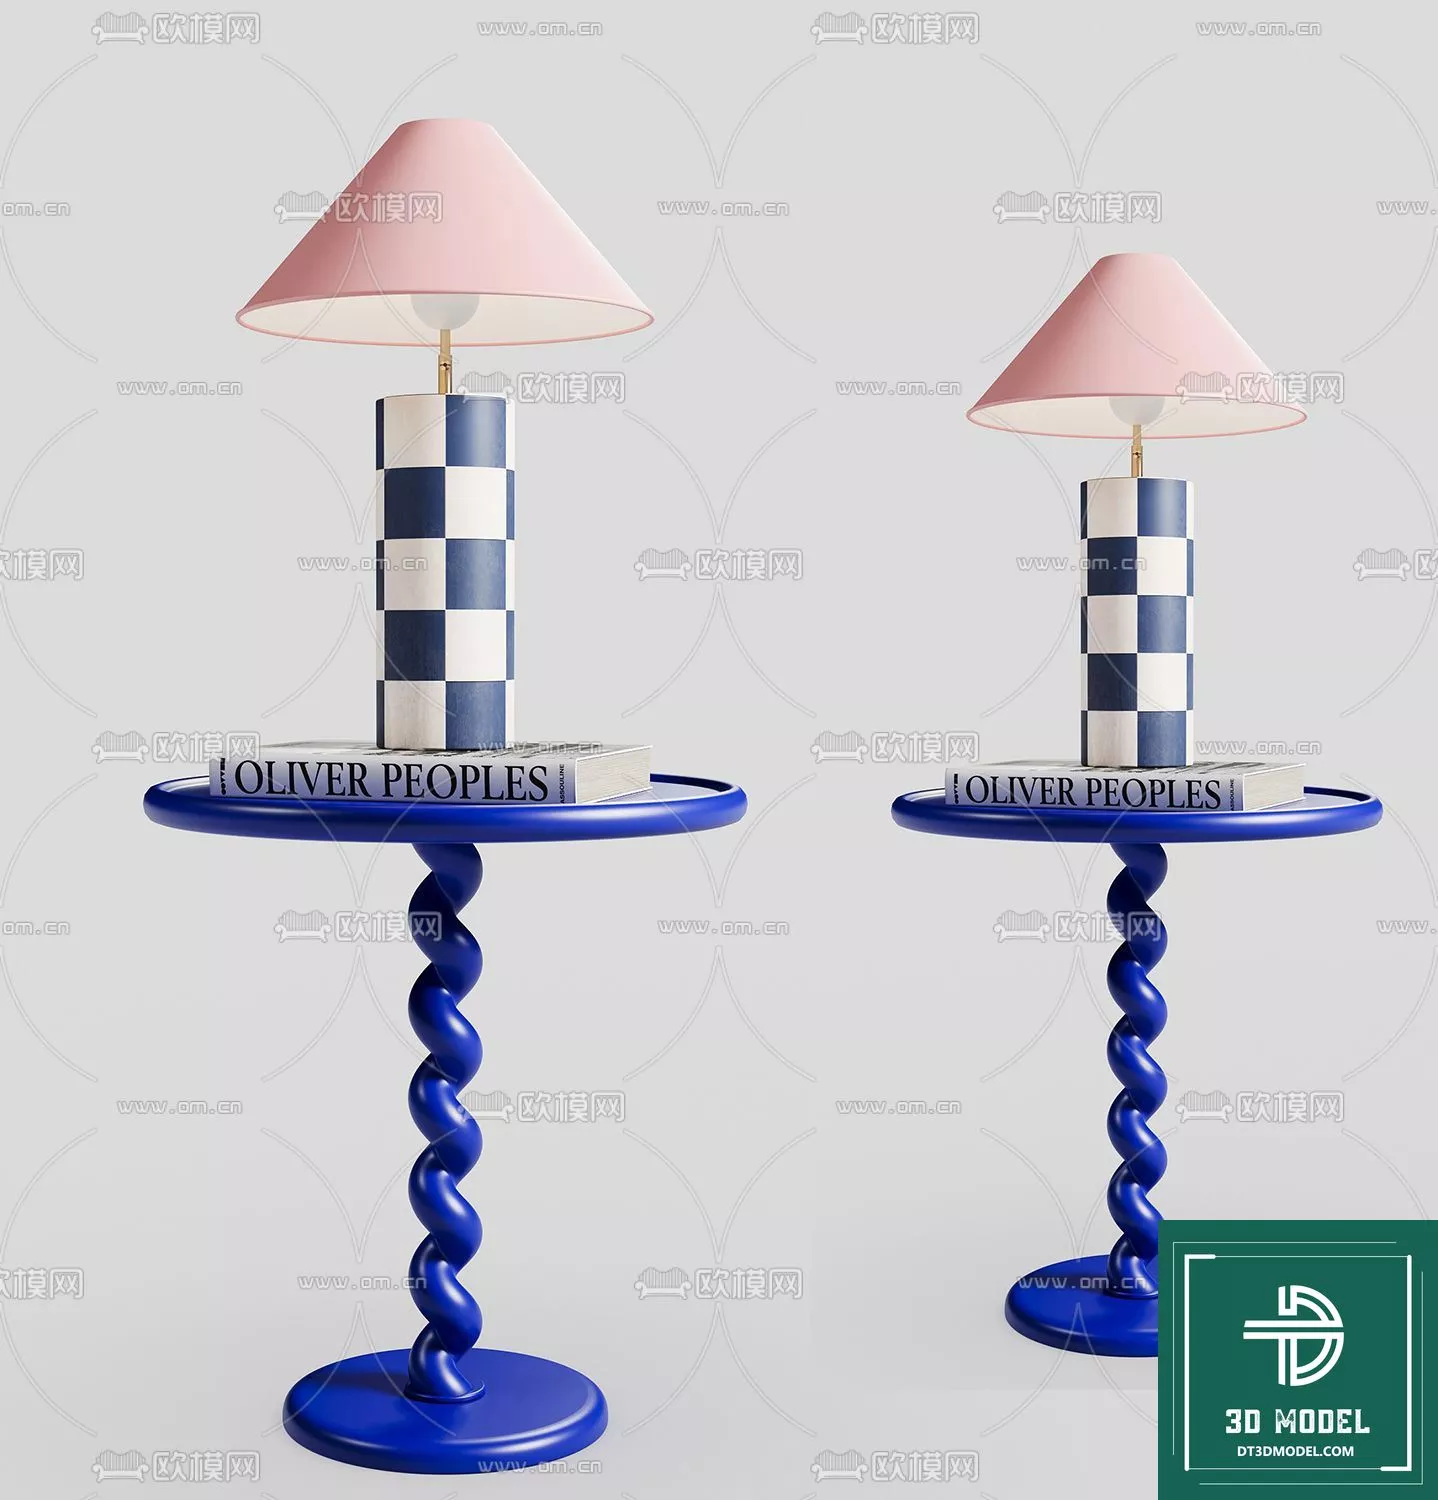 MODERN TABLE LAMP - SKETCHUP 3D MODEL - VRAY OR ENSCAPE - ID14596